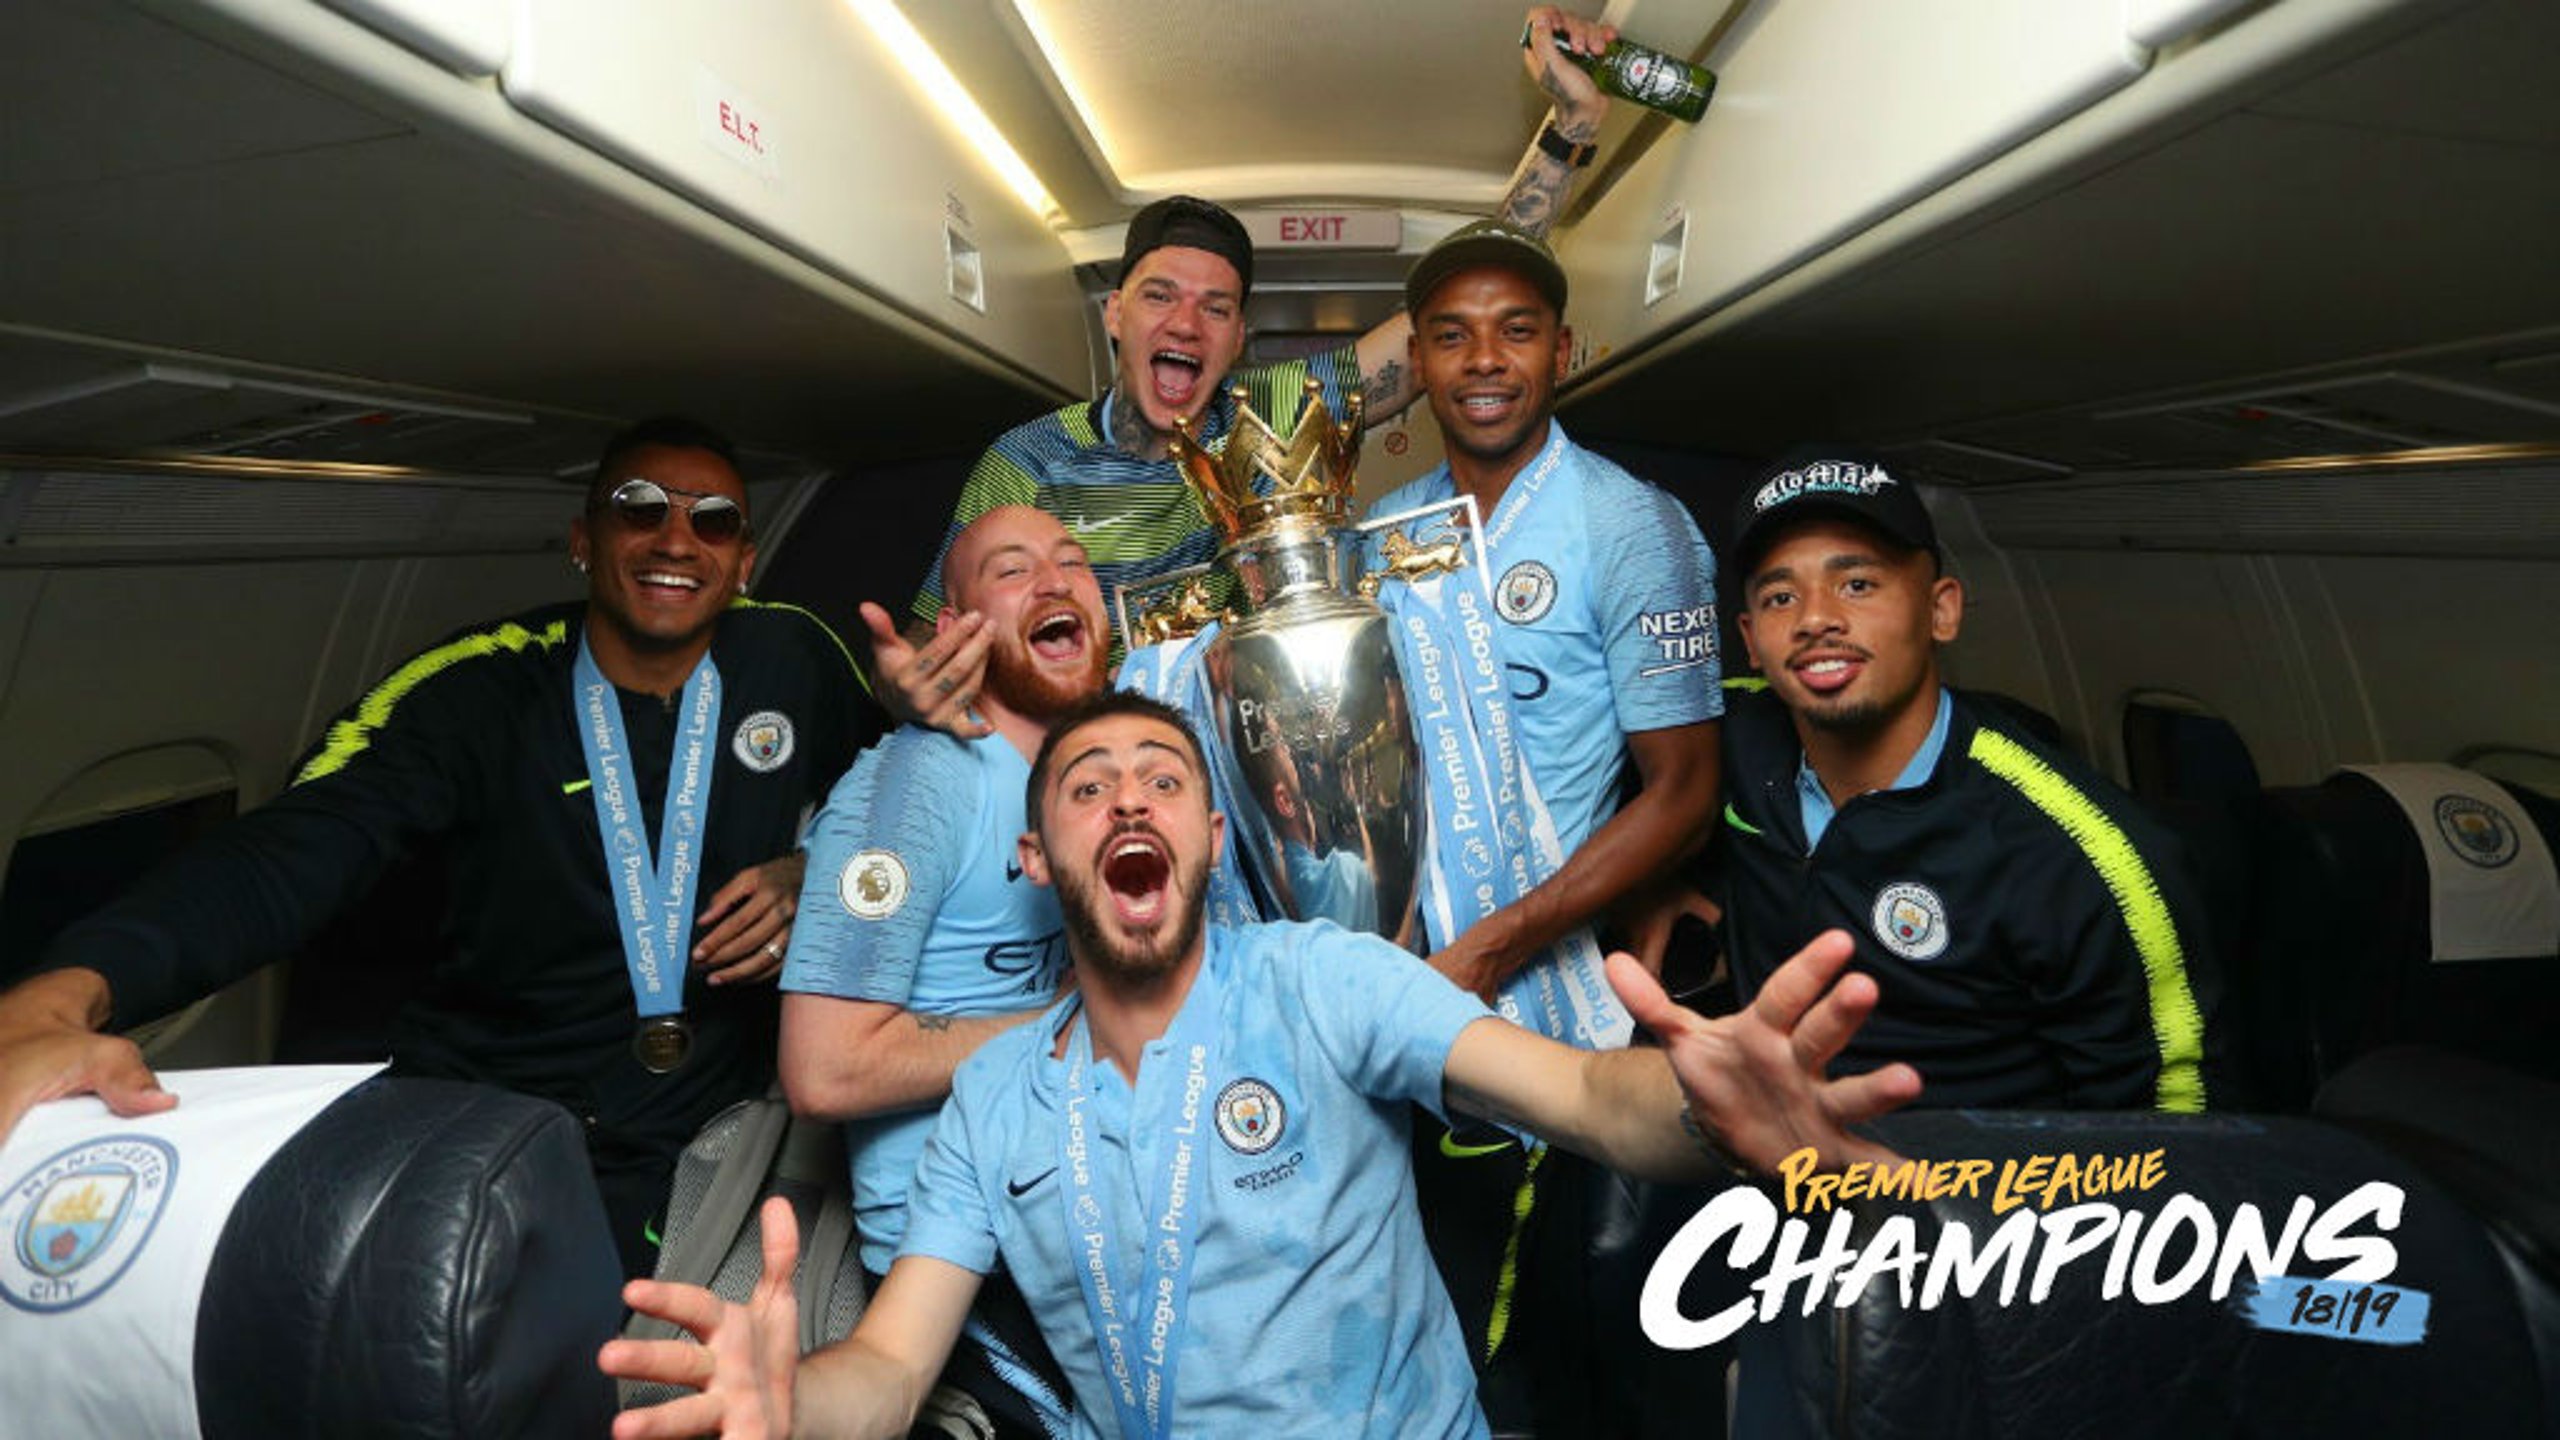 Plane sailing for City's champions!